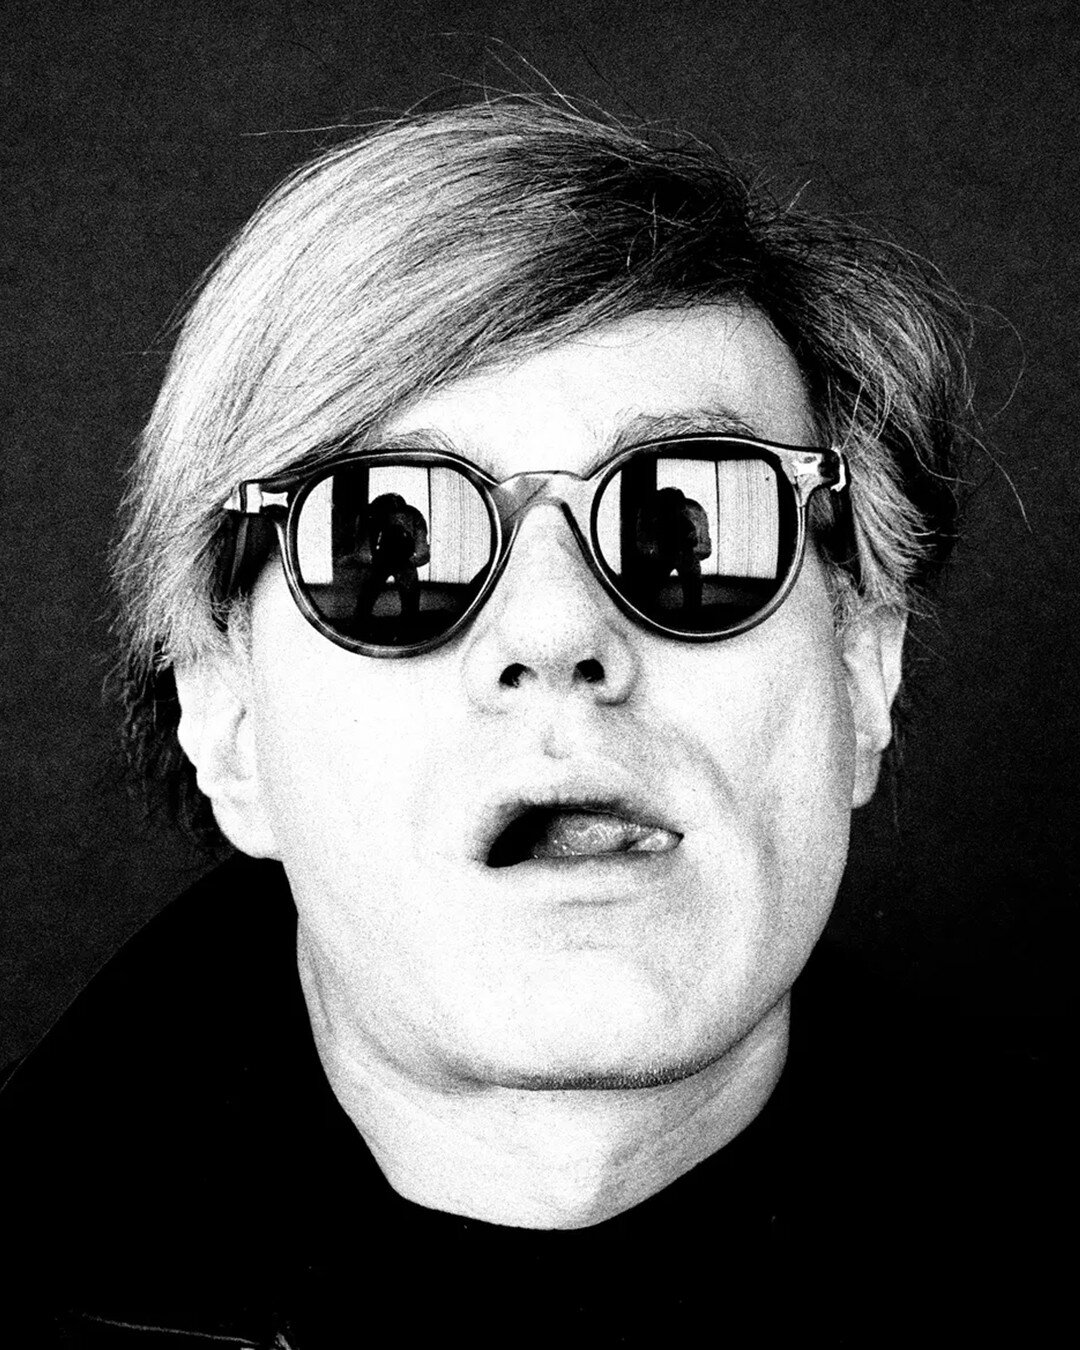 &ldquo;People should fall in love with their eyes closed.&rdquo;

Happy Birthday Andy Warhol 🖤🖤🖤
b. 1928
_______________________________

#andywarhol #warhol #popart #popartist #artistbirthday #artfriday #artartart #newyorkart #nycart #artist #fam